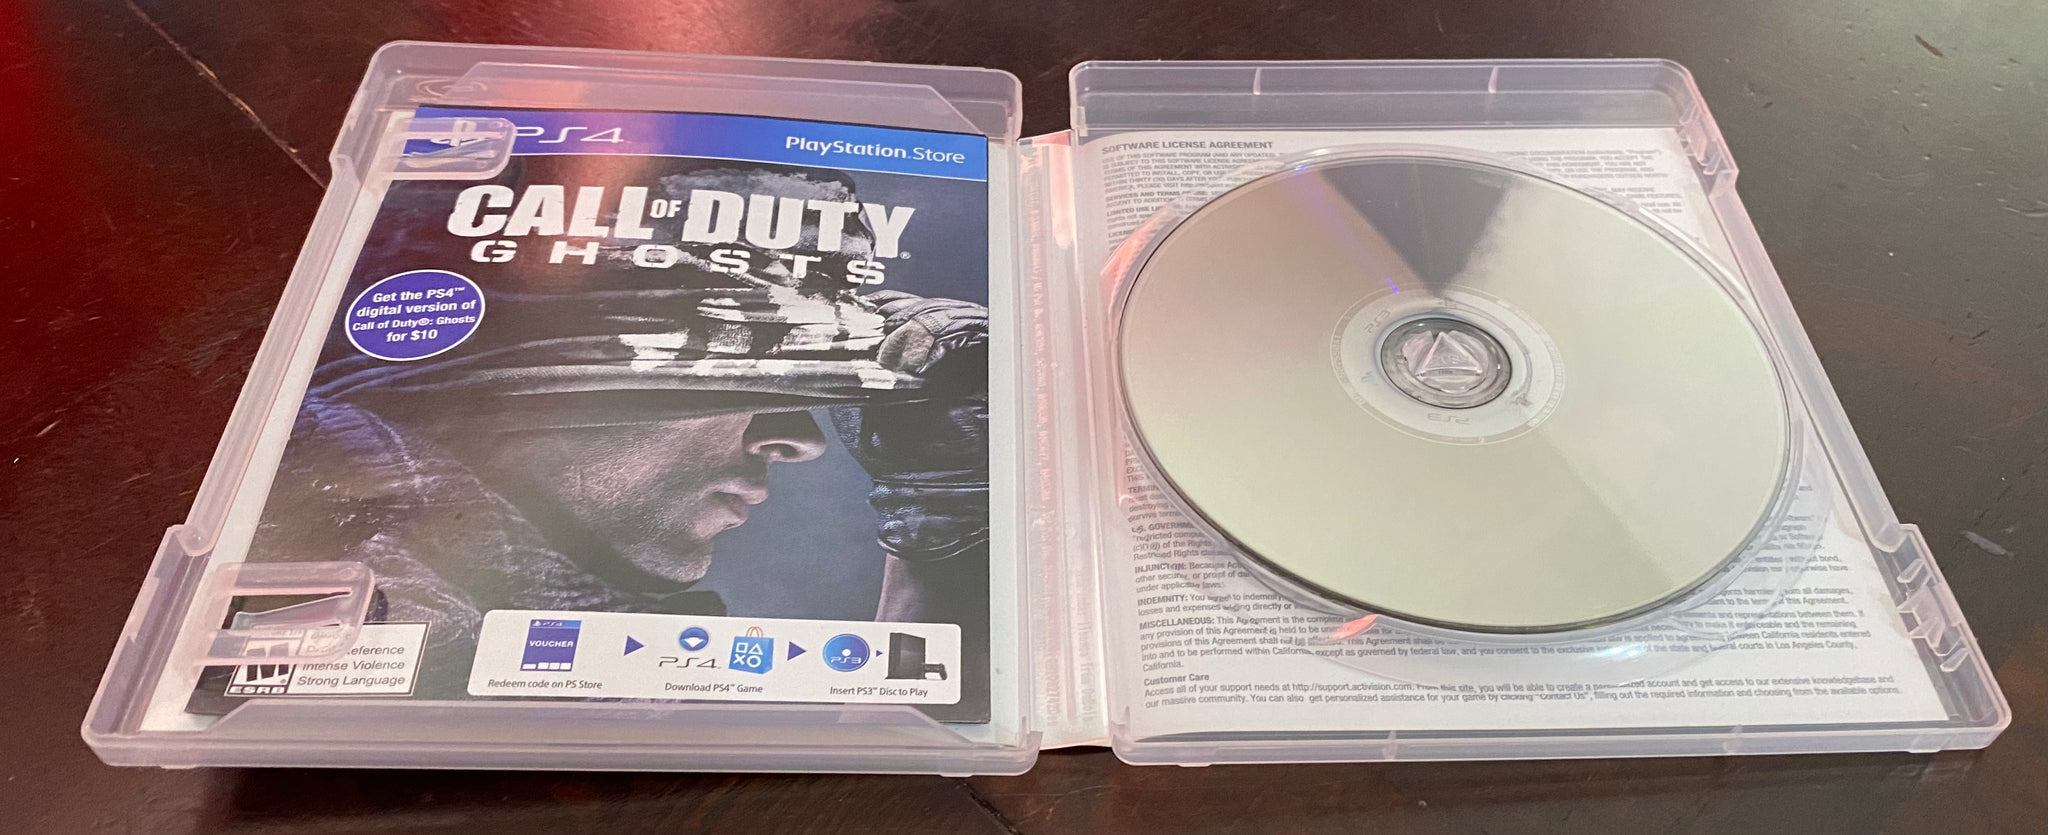 Call of Duty Ghosts PlayStation 4 PS4 Game For Sale